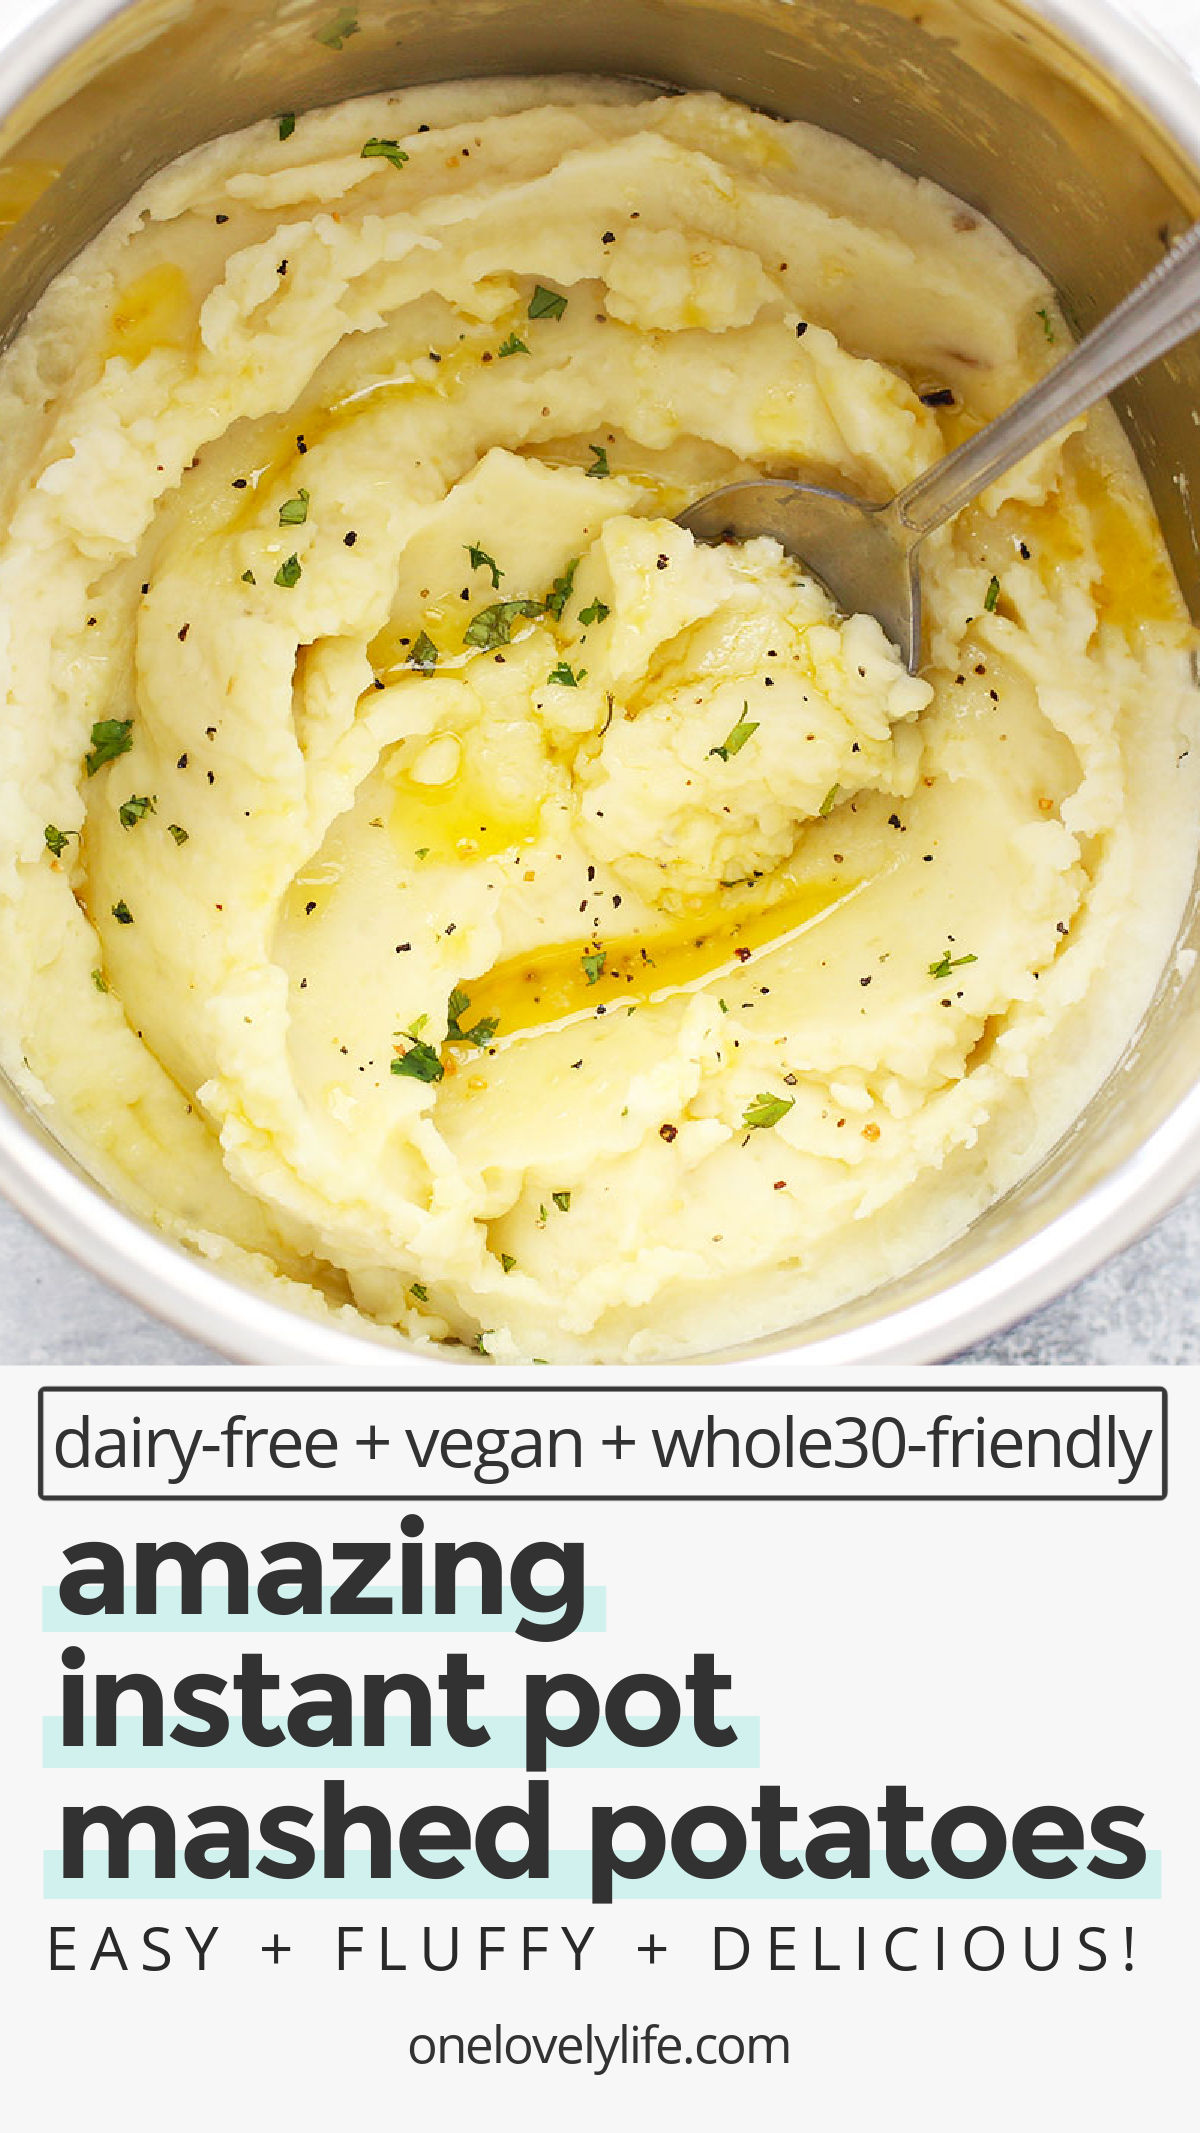 Instant Pot Mashed Potatoes - These creamy, fluffy mashed potatoes are so easy, thanks to the pressure cooker! They're the perfect accompaniment to a hearty home-cooked meal! (Gluten-free, dairy-free, vegan + Whole30 options!) / instant pot vegan mashed potatoes / instant pot dairy free mashed potatoes // instant pot whole30 mashed potatoes / Pressure cooker mashed potatoes / dairy free mashed potatoes / #mashedpotatoes #thanksgiving #glutenfree #vegan #whole30